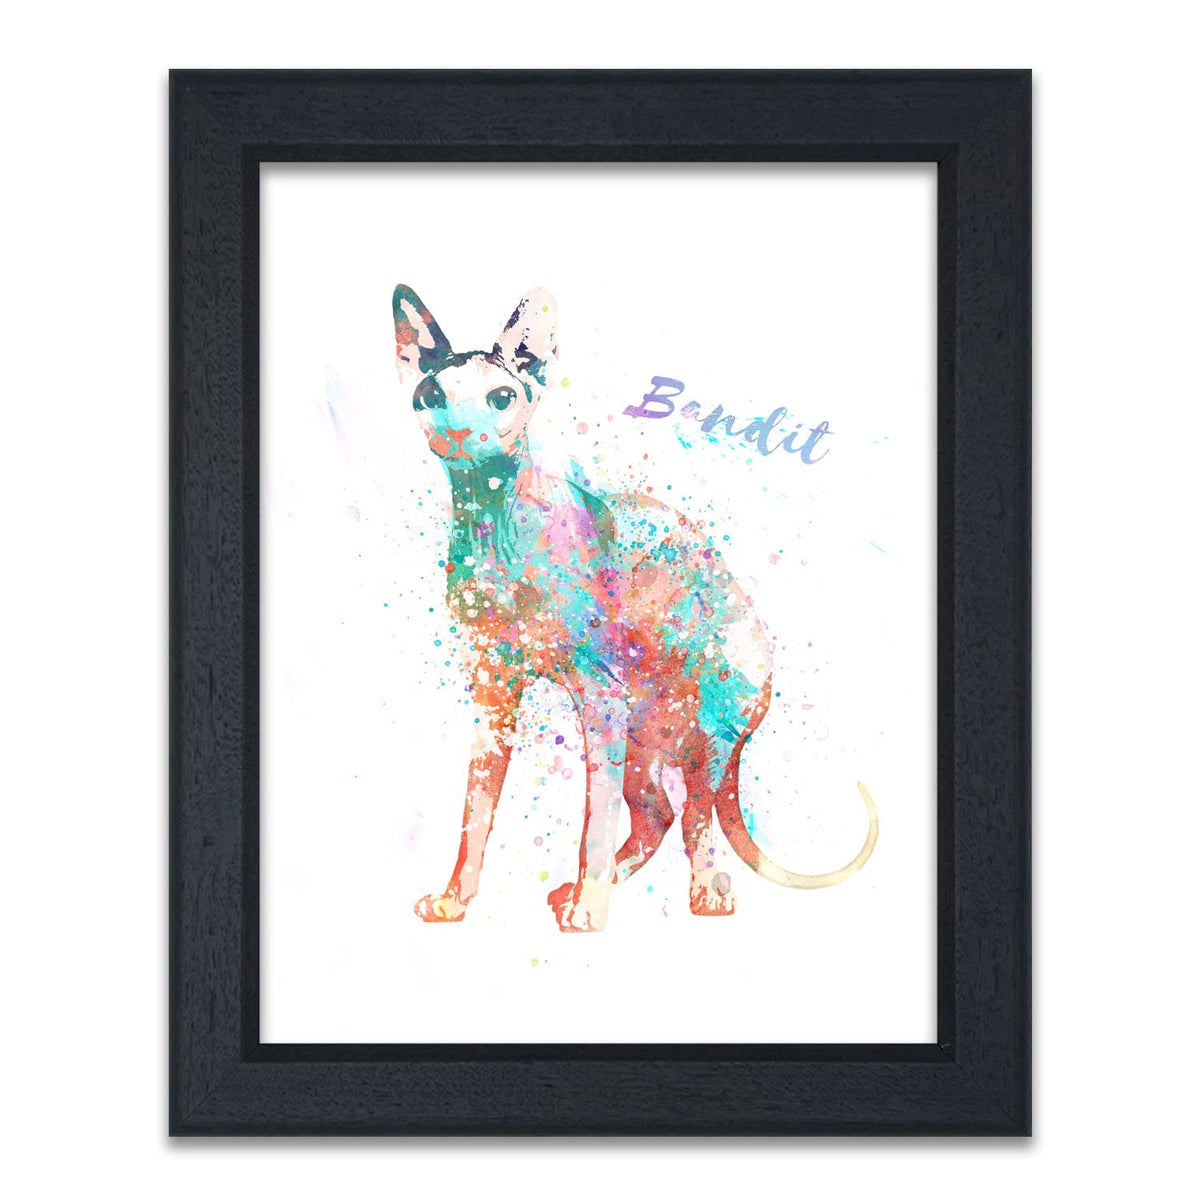 Sphynx Cat Framed Art Decor from Personal-Prints